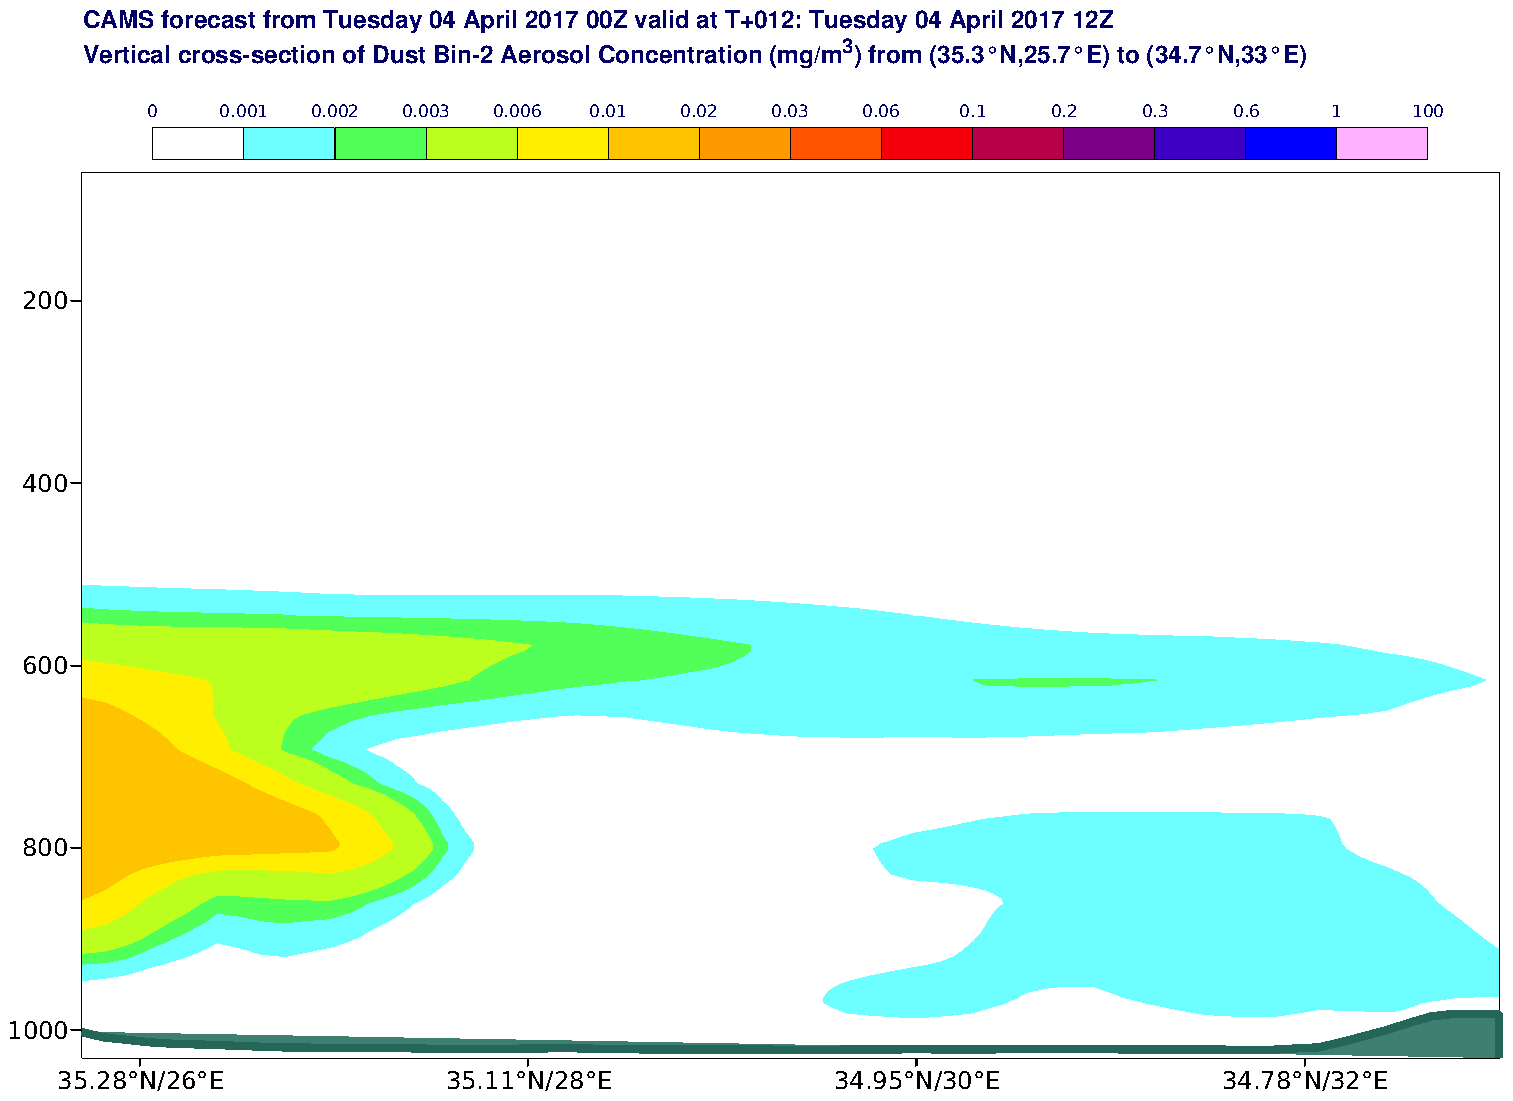 Vertical cross-section of Dust Bin-2 Aerosol Concentration (mg/m3) valid at T12 - 2017-04-04 12:00